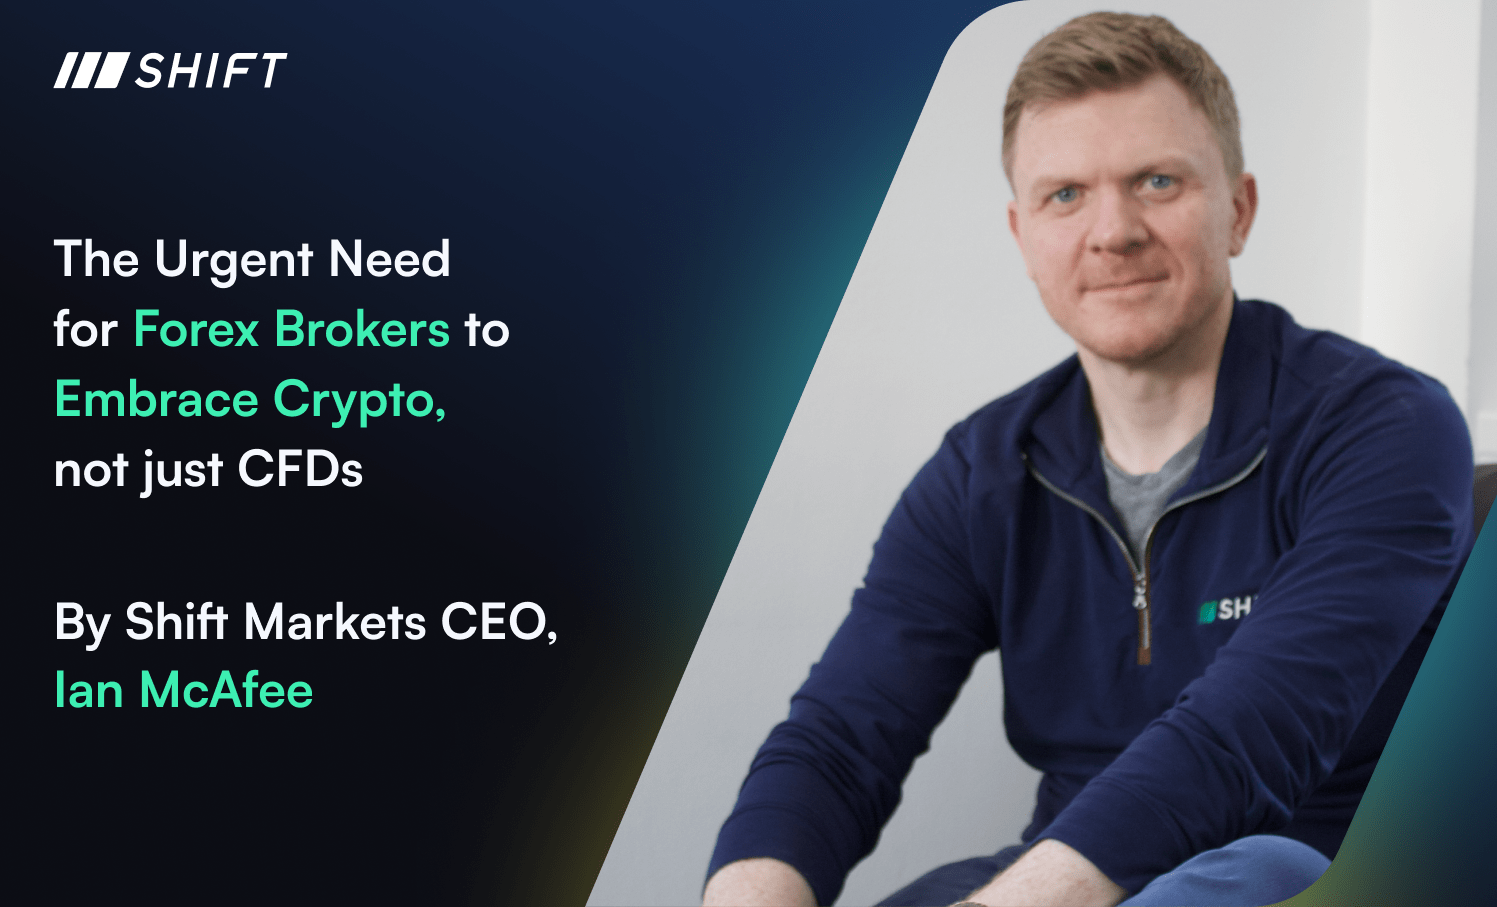 The urgent need for forex brokers to embrace crypto, not just CFDs.